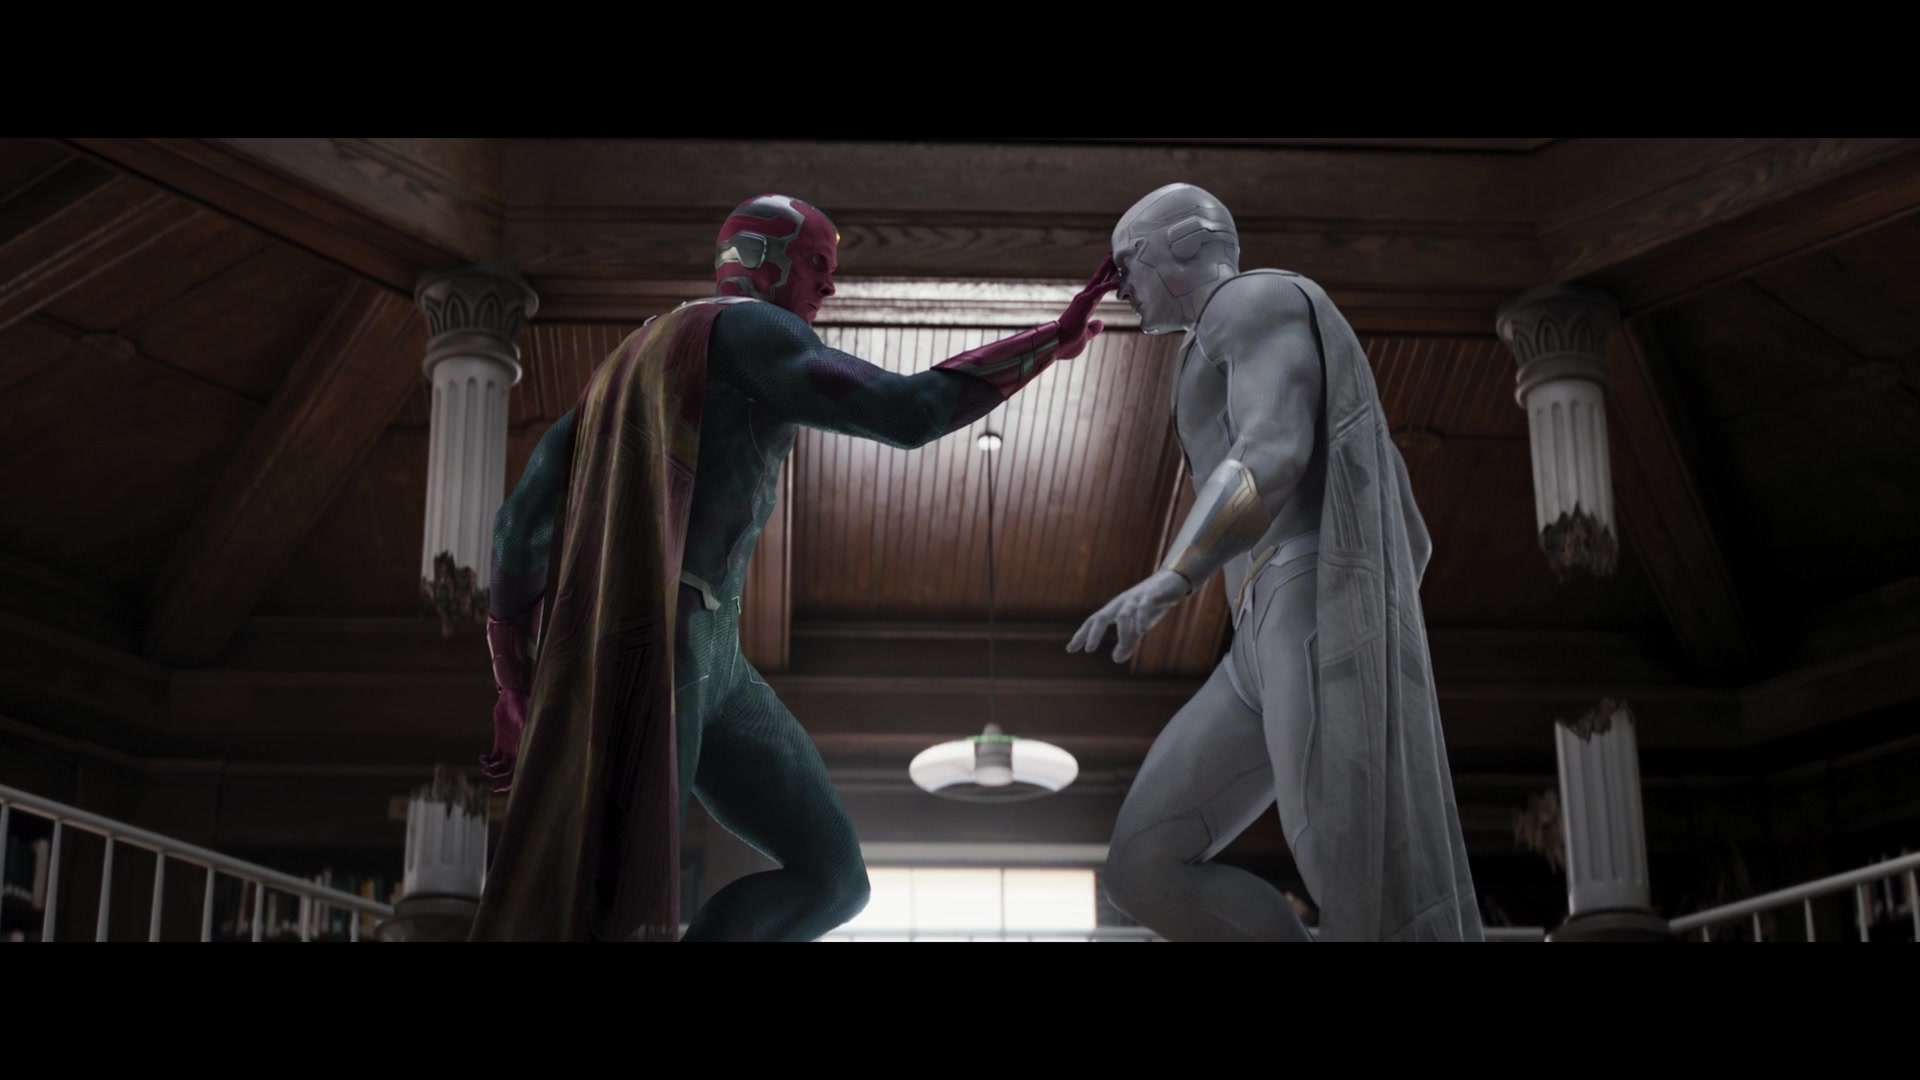 Vision (Paul Bettany) prepares to unlock the 'soul' of his animated corpse in WandaVision Season 1 Episode 9 "The Series Finale" (2021), Marvel Entertainment via Disney Plus